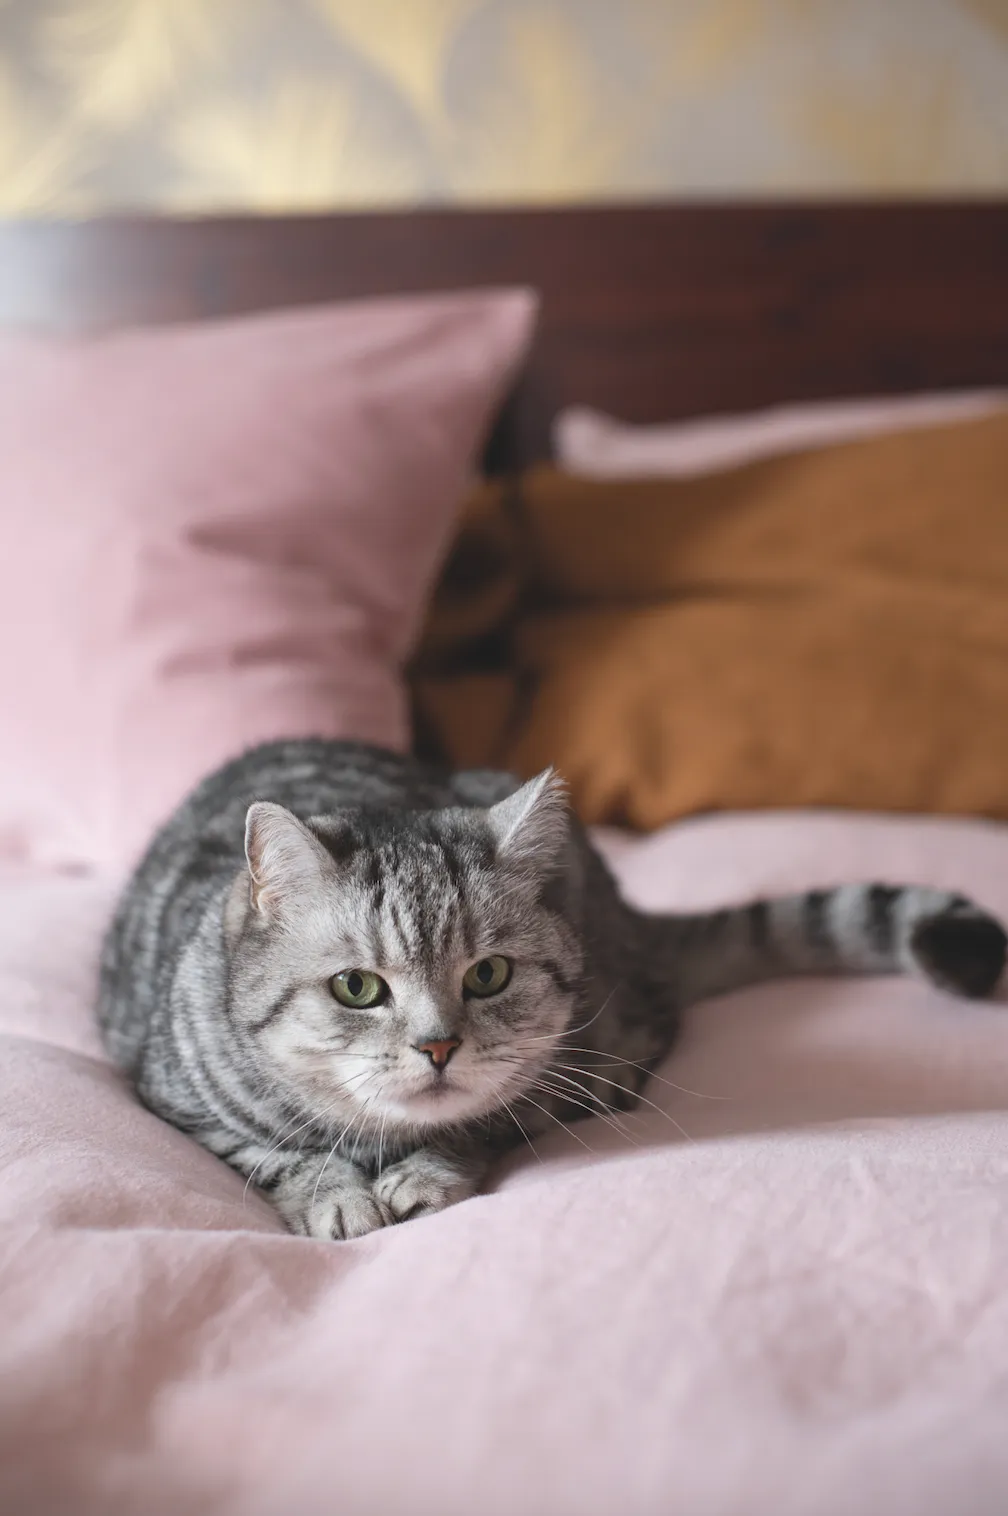 Real home - cat on a pink bed